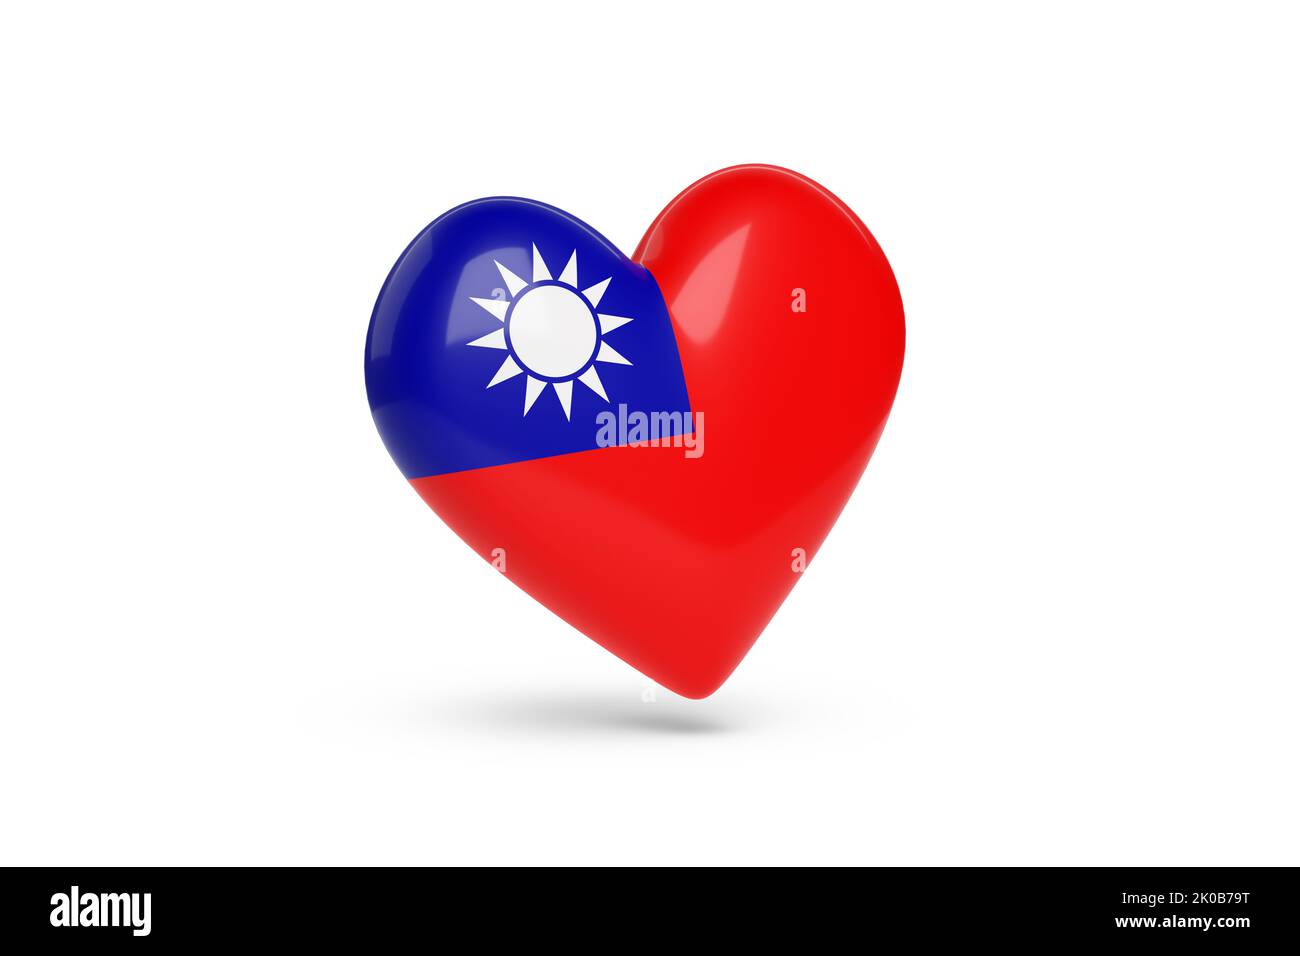 Heart with the colors of flag of Republic of China isolated on white background. 3d illustration. Stock Photo